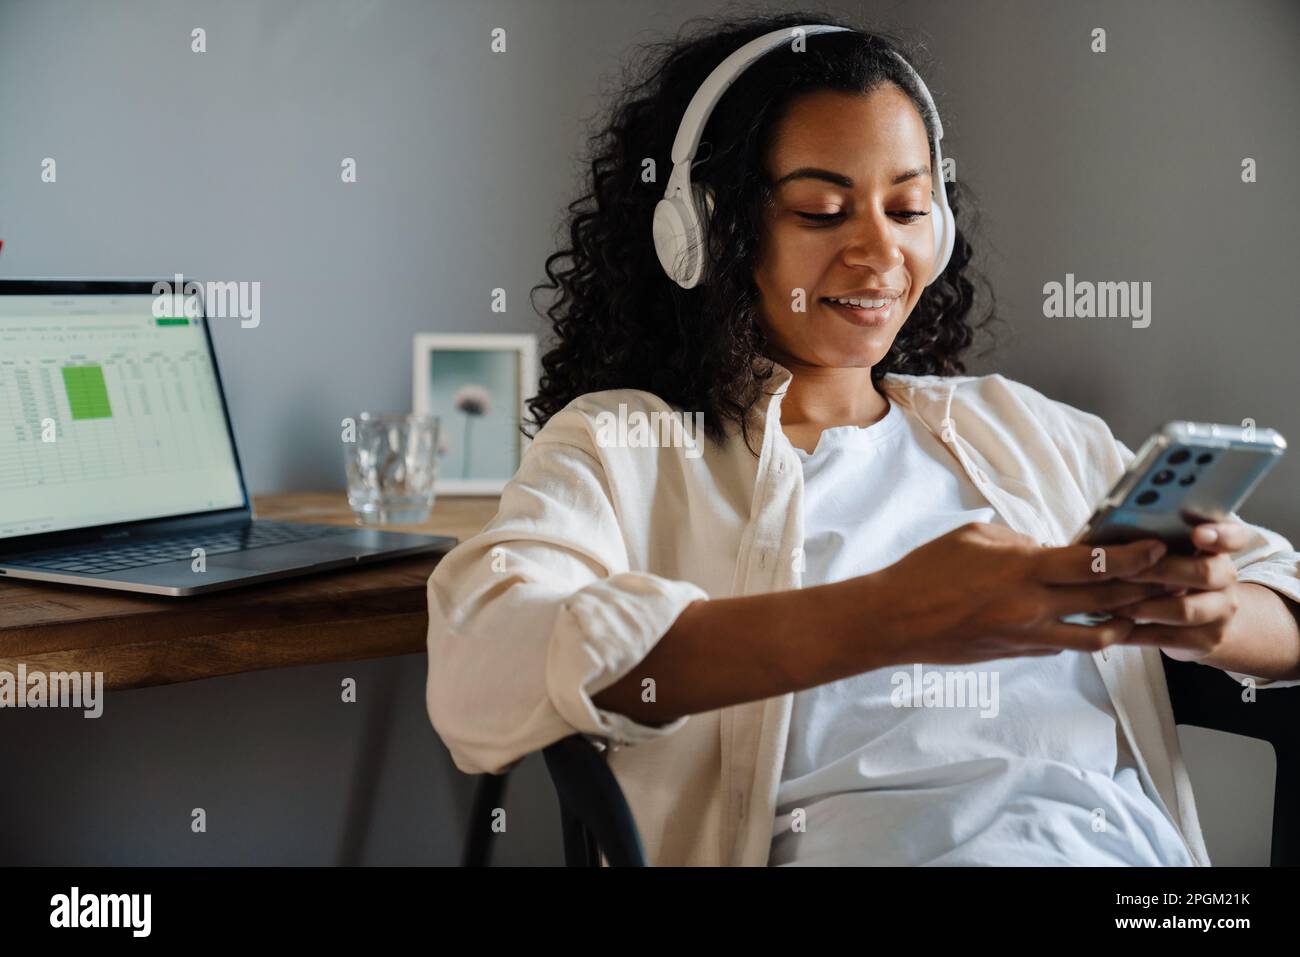 Black young woman in headphones using mobile phone while sitting on chair at home Stock Photo